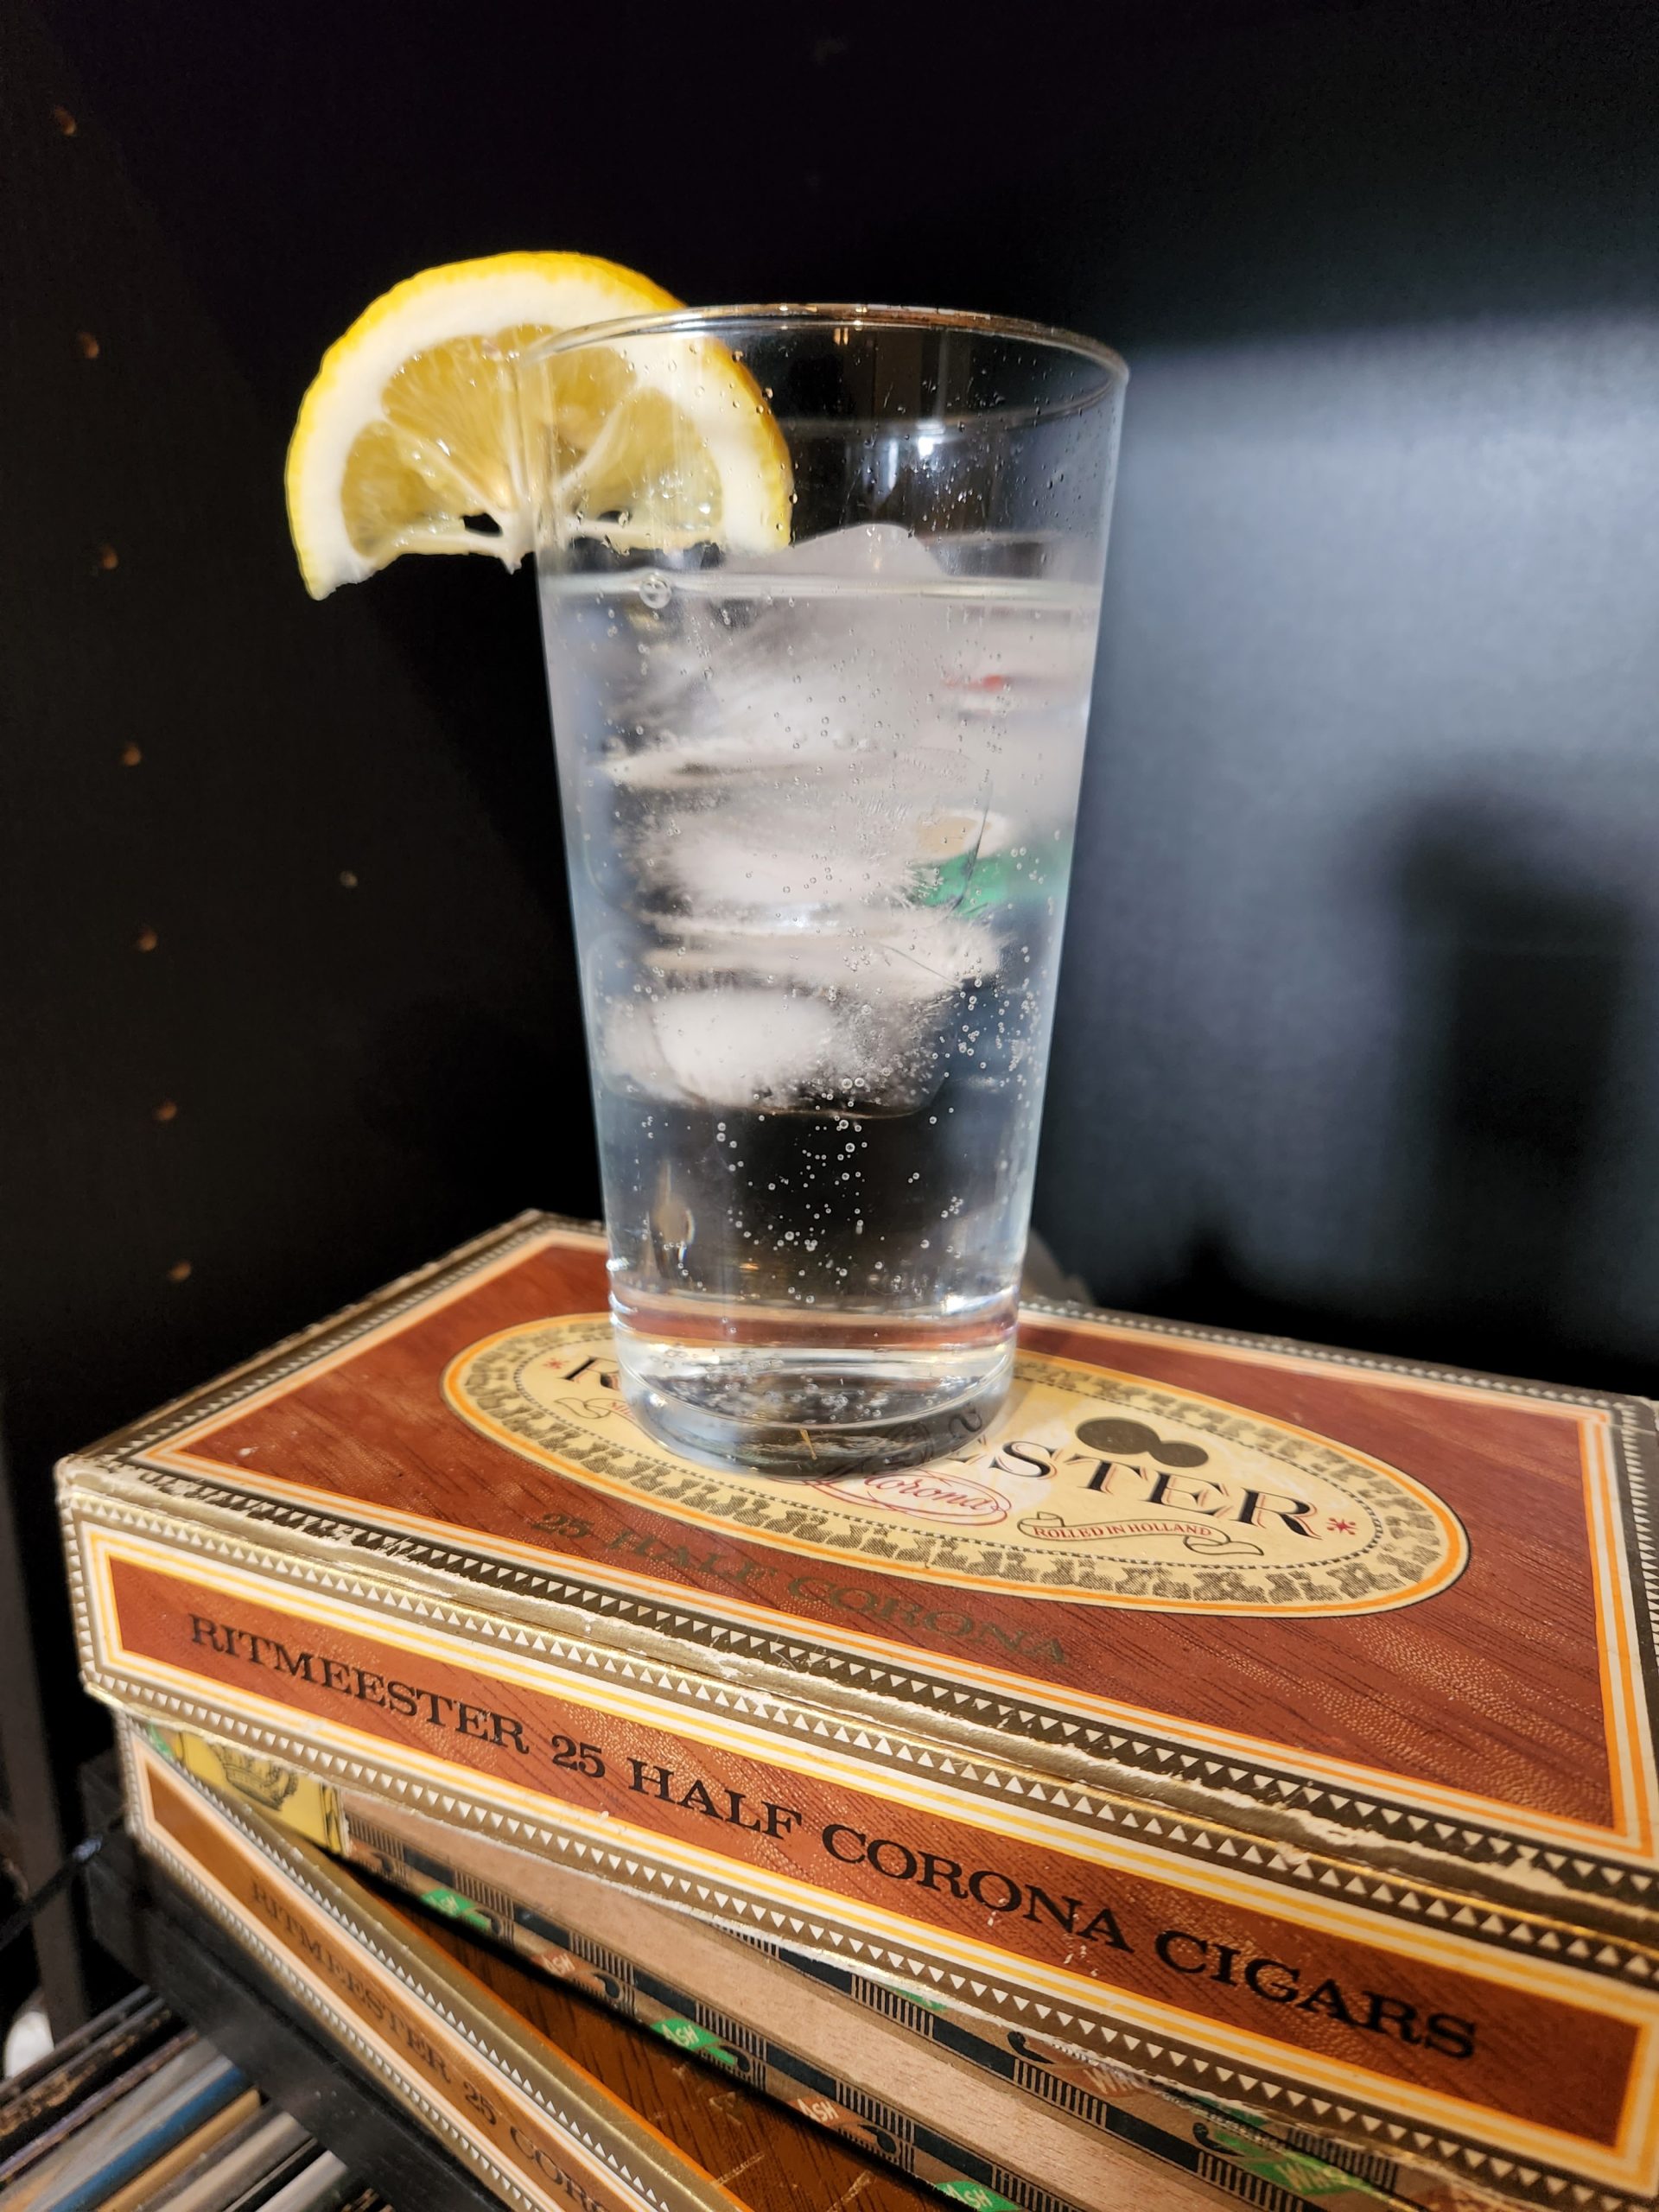 Gin and Tonic Recipe - What Cocktail Can I Make?